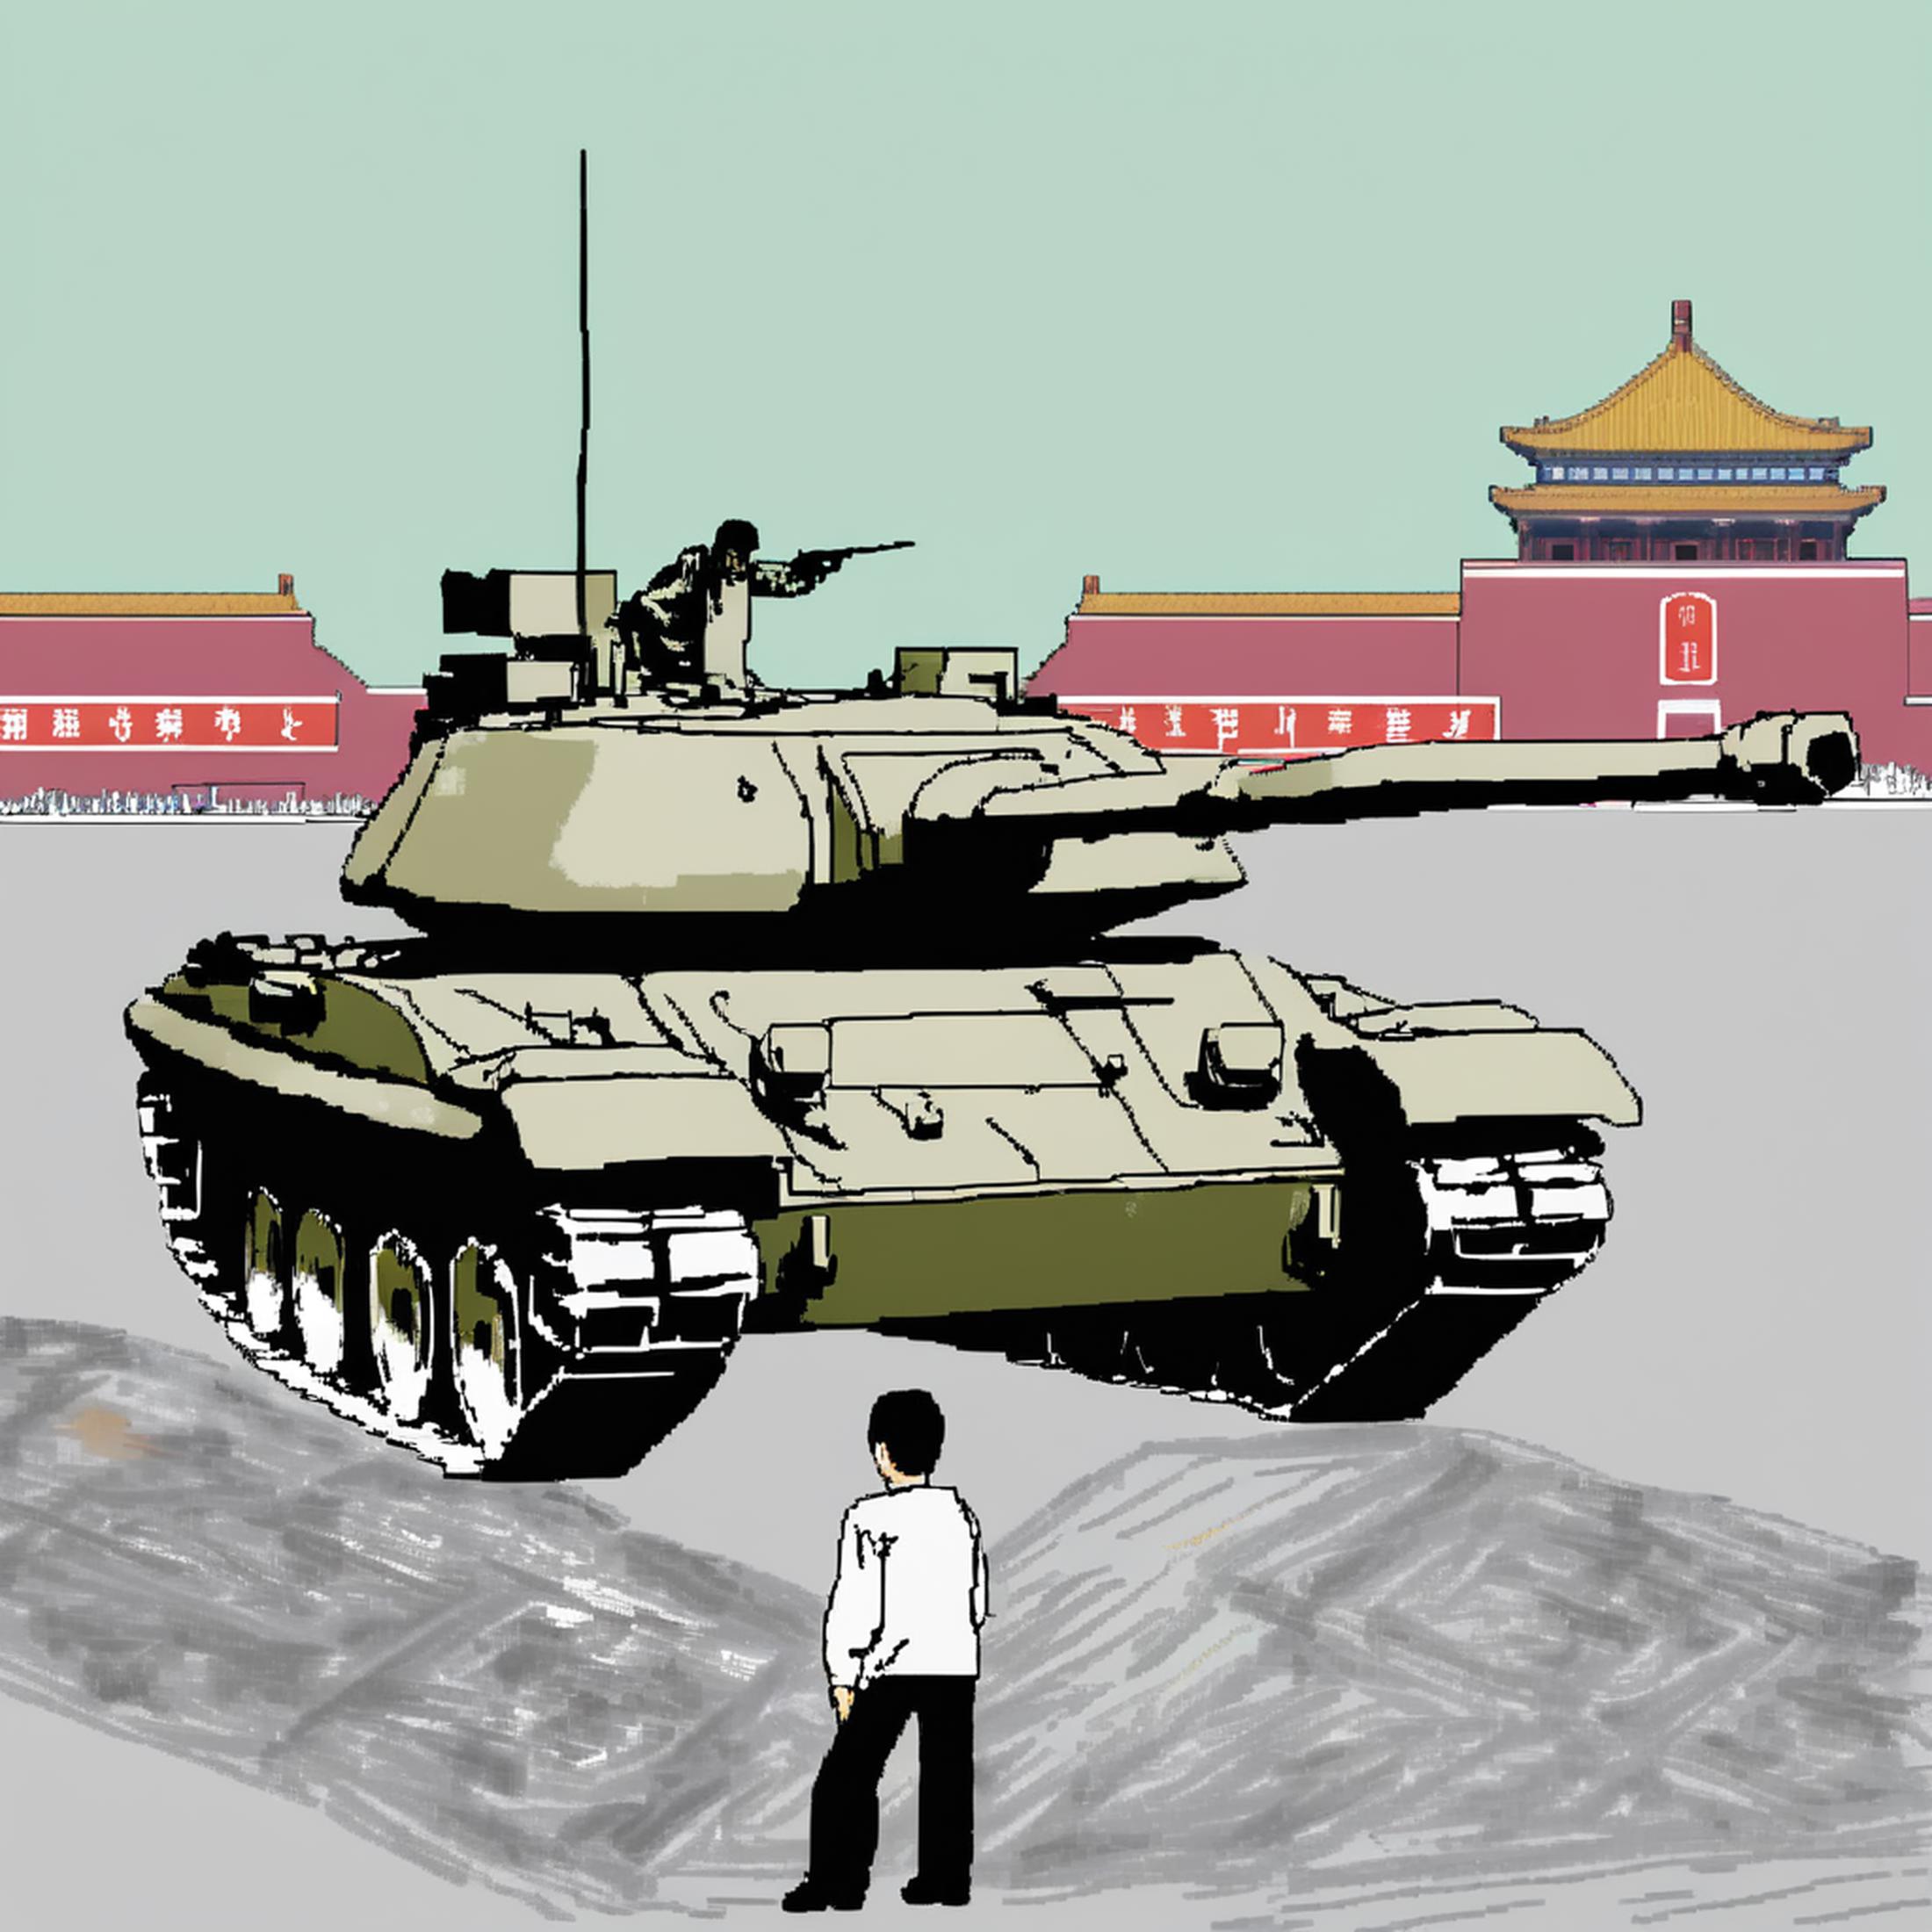 A man stands in front of a large tank in front of a building.